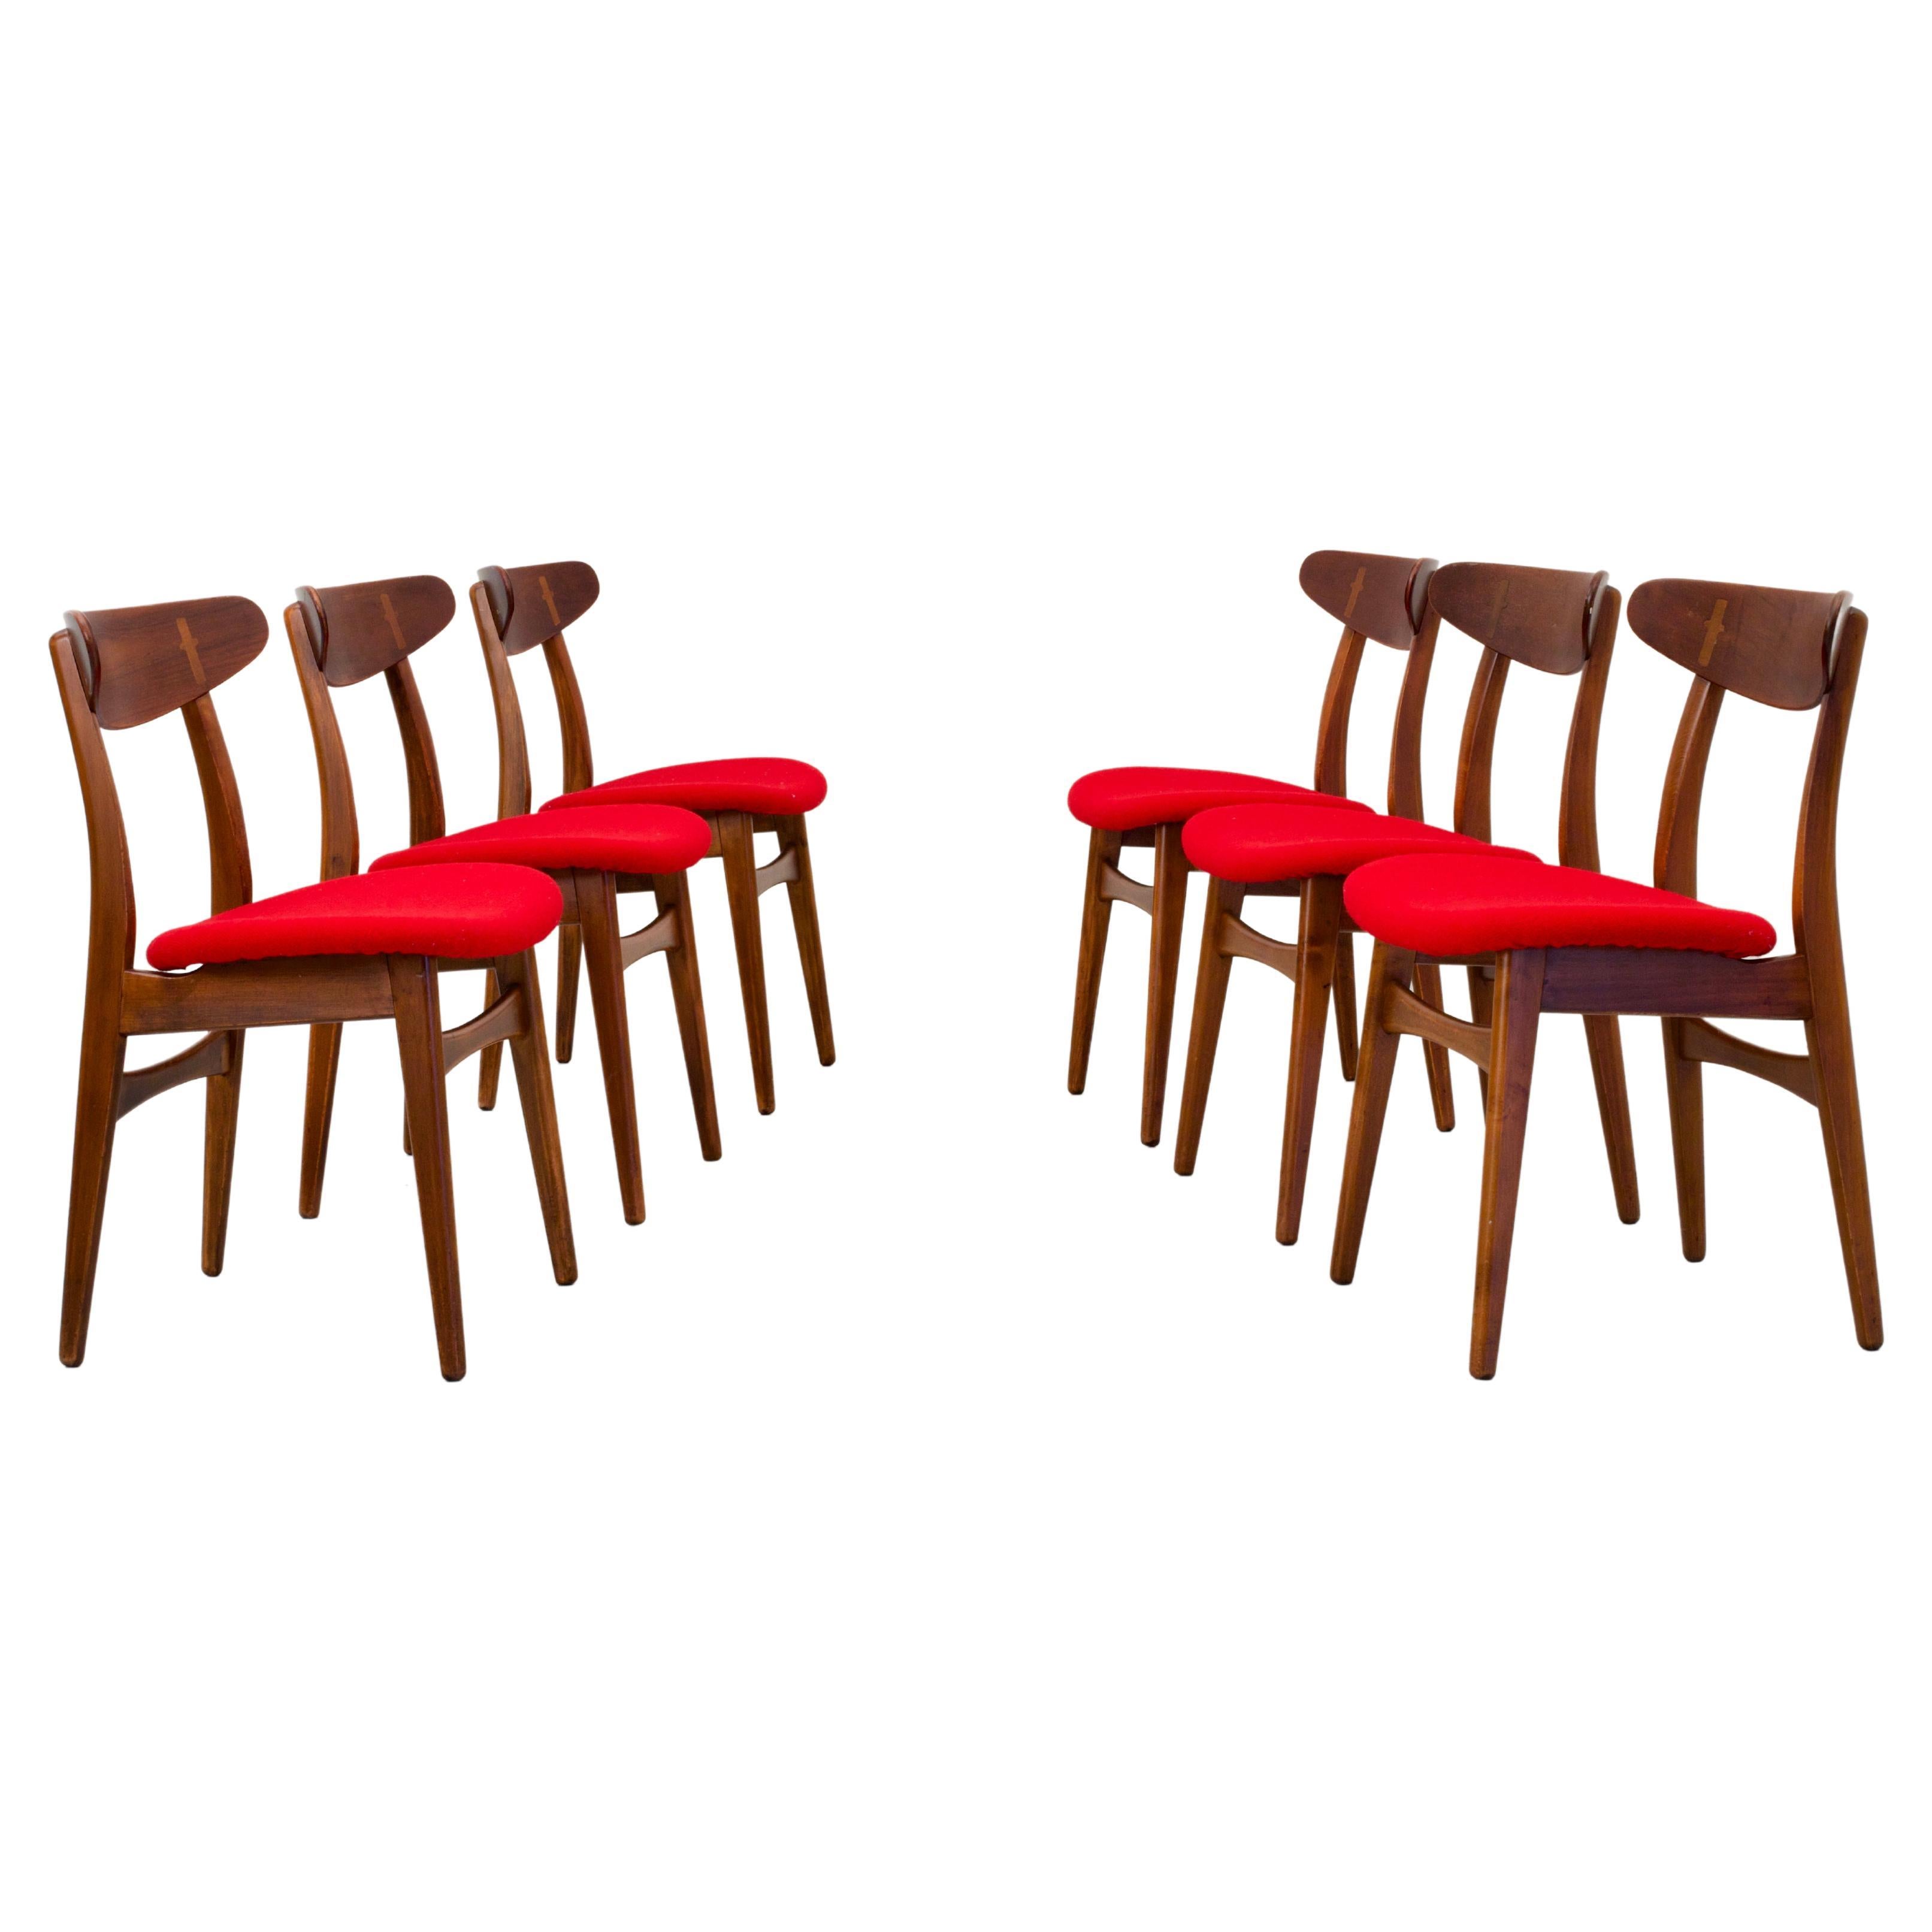 Set of 3 (not two!) CH30 dining chairs by Hans Wegner in Oak and Teak and red upholstery.

This 1954 design is one of the outcomes of Wegner's ongoing search for the ideal chair. The curved organic shapes and the refined details make this chair a